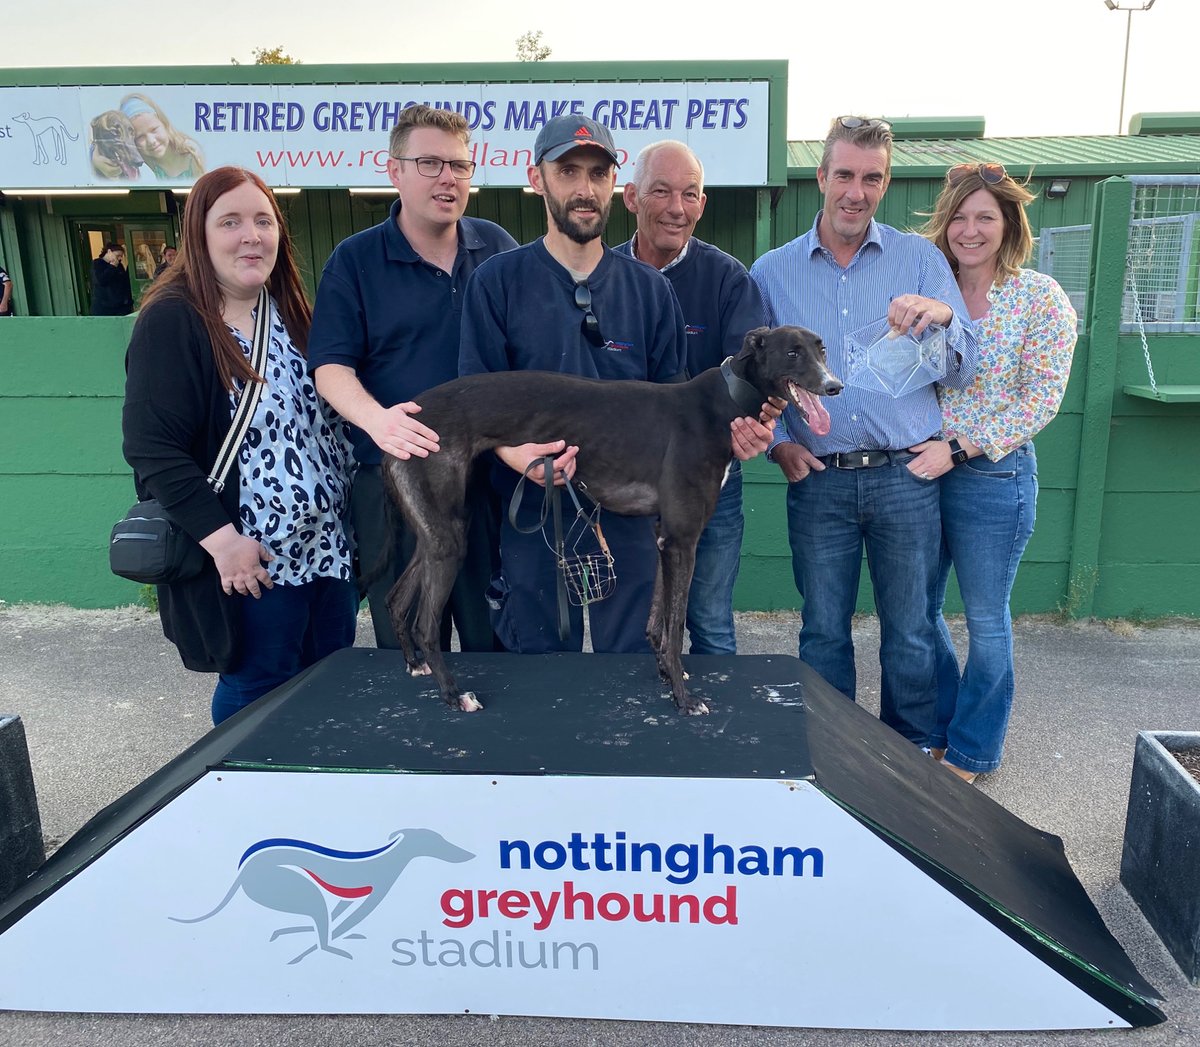 Well done to Leighas Dream for winning The James Hodgkin Birthday Stakes, in a time of 29.76. Trained by Barry Denby, owned by Northwood Pub. Presented by James Hodgkin, we hope you had a great evening celebrating your birthday with us James!